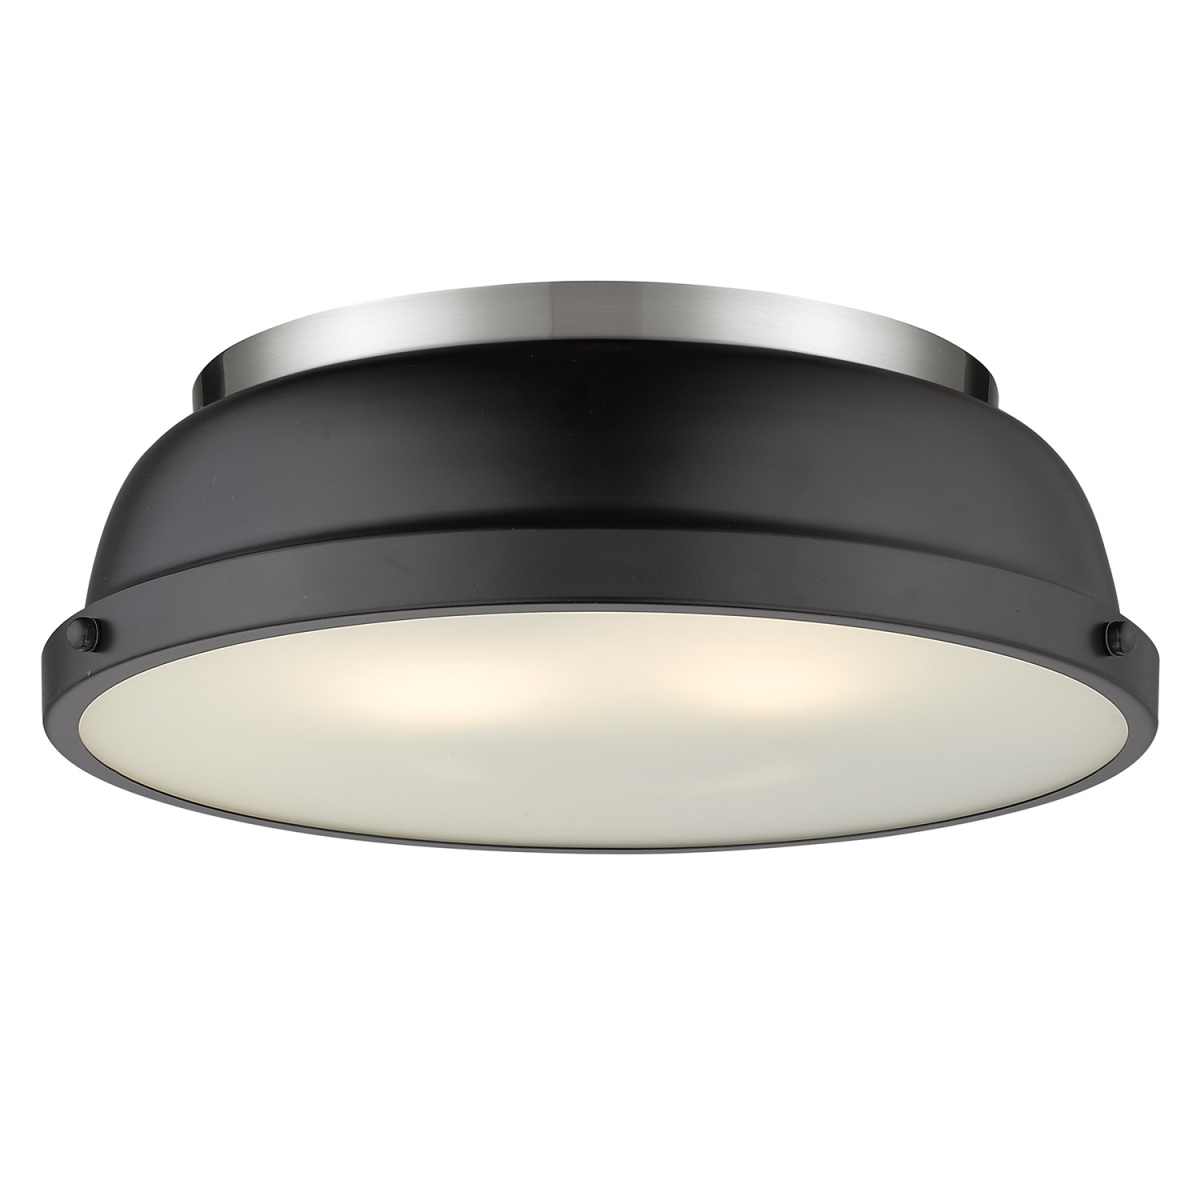 3602-14 Pw-blk Duncan 14 In. Flush Mount Light With Matte Black Shade, Pewter